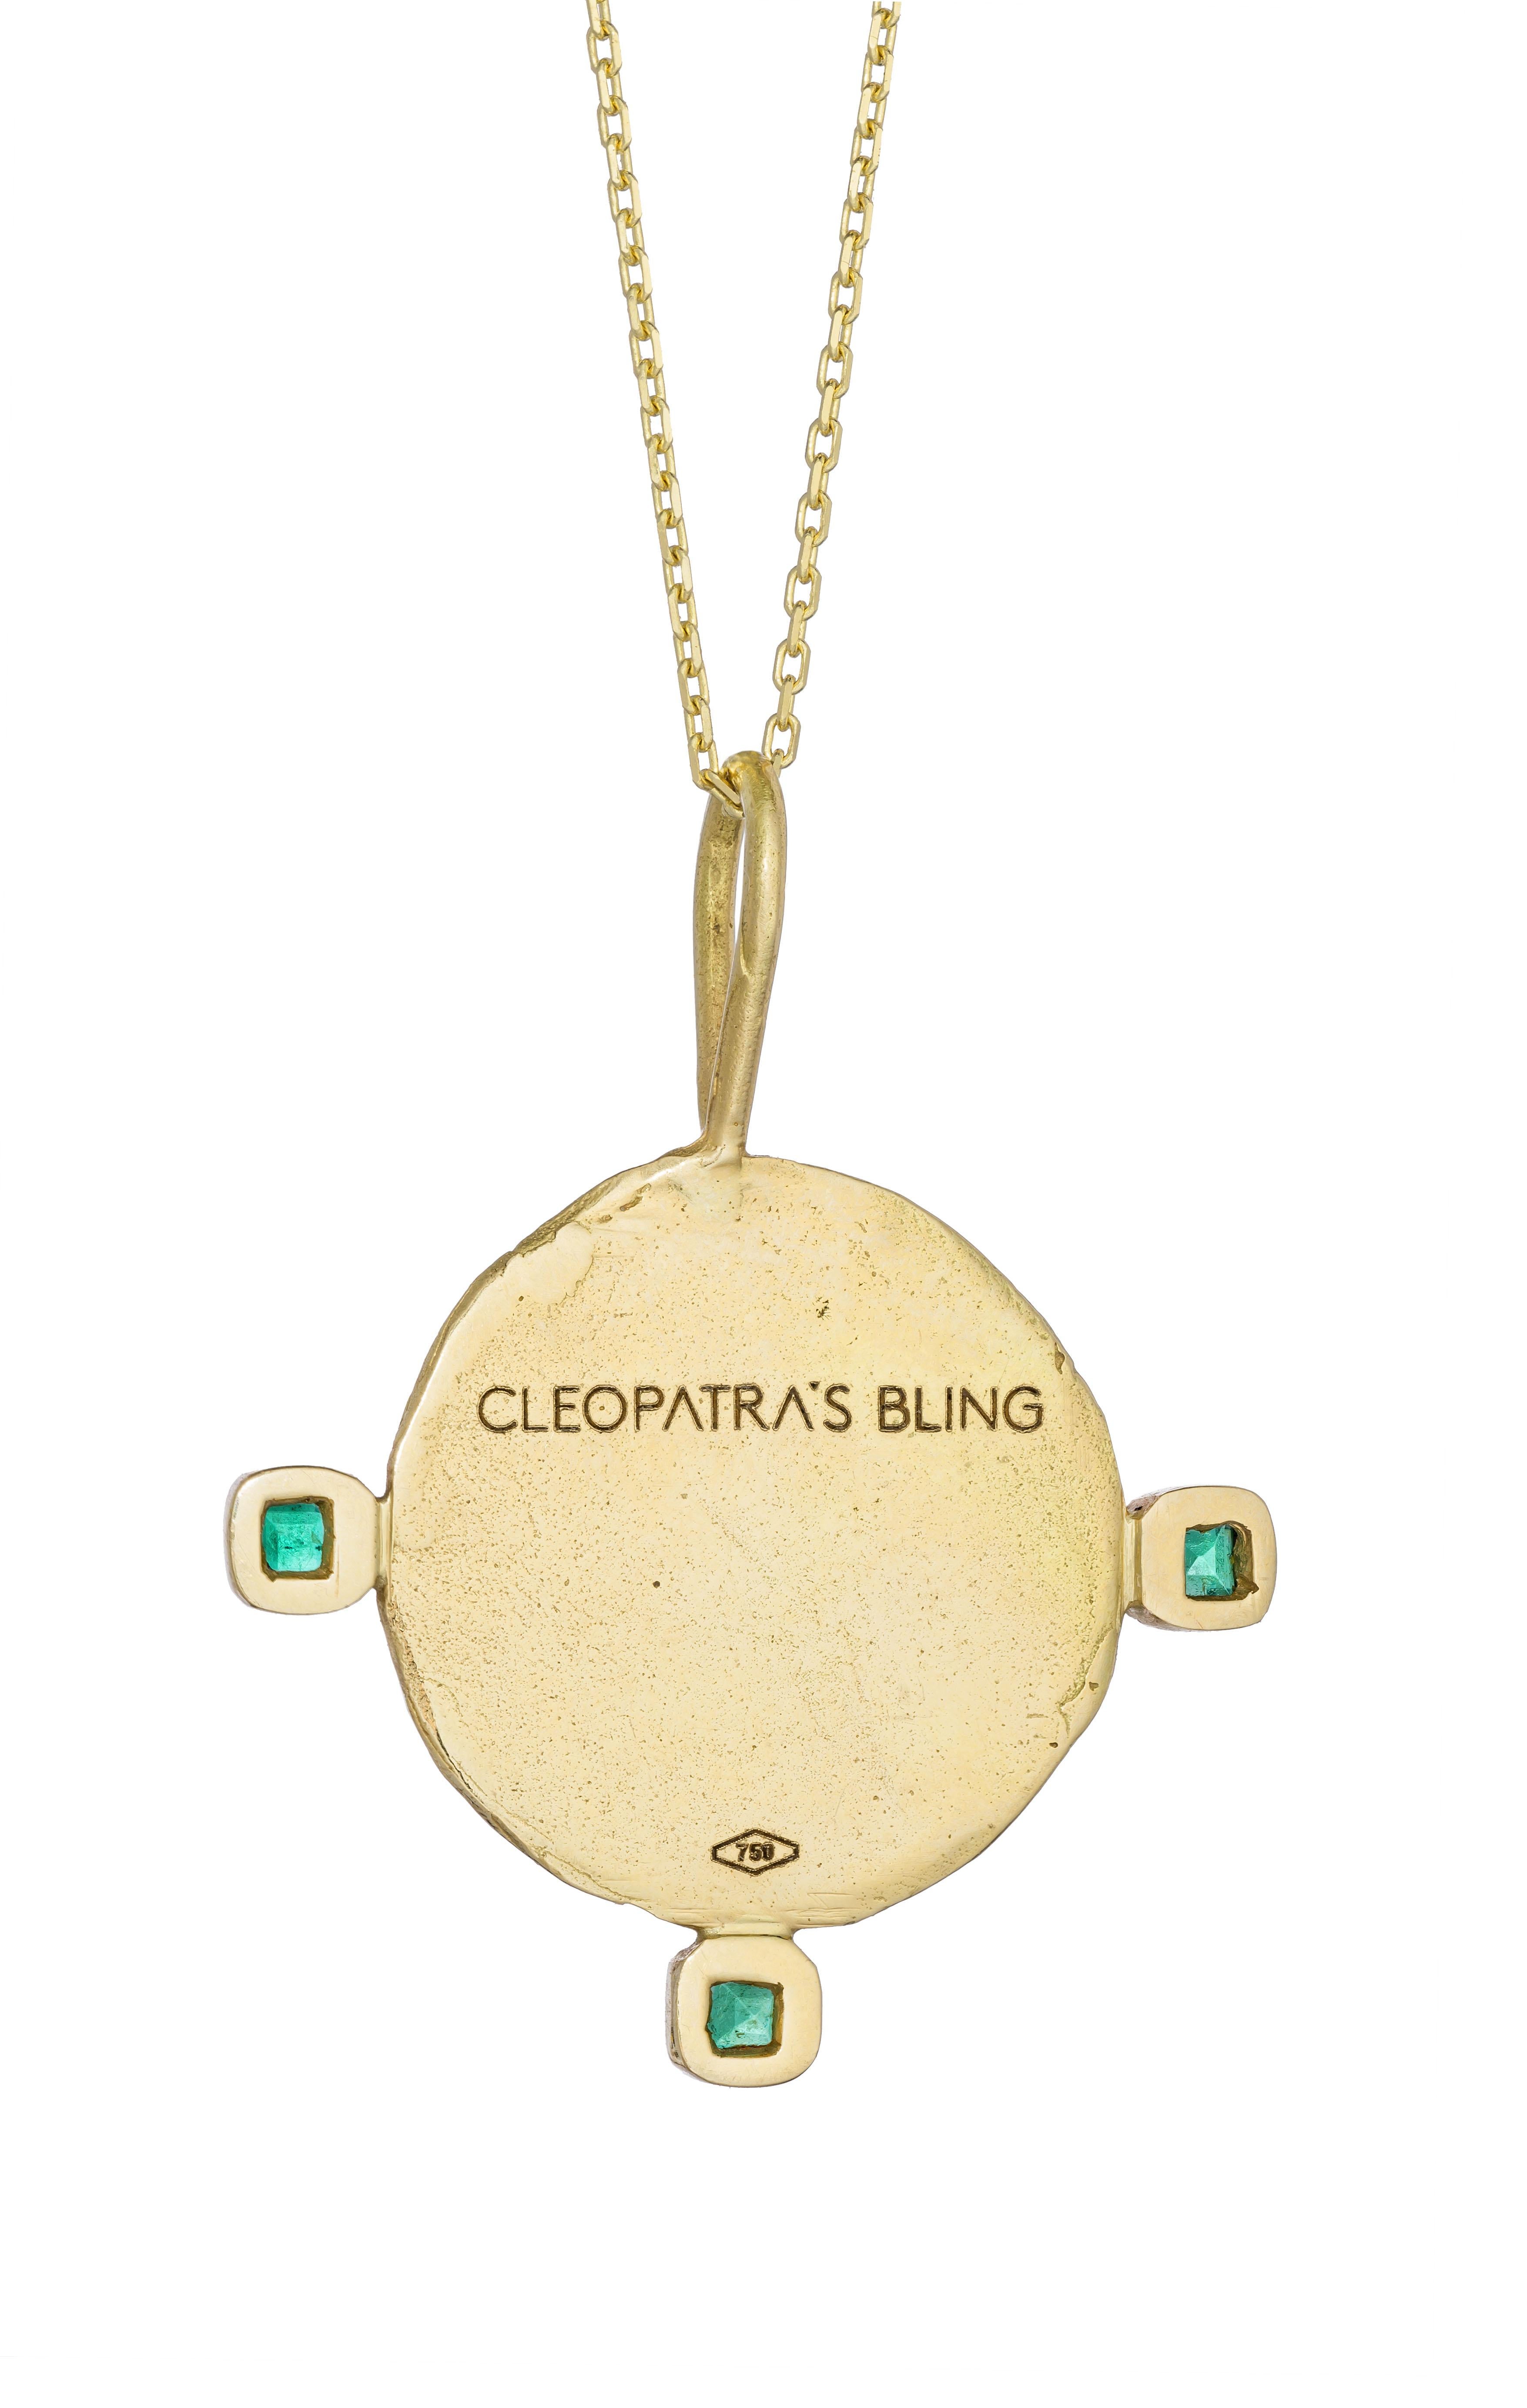 Byzantine Venice Domino Contrarini Medallion with Emeralds, 18 Karat Yellow Gold
Handcrafted and individually cast in 18-karat solid yellow gold. Olivia carves each piece from wax, making these pendants unique, which we believe is what gives them